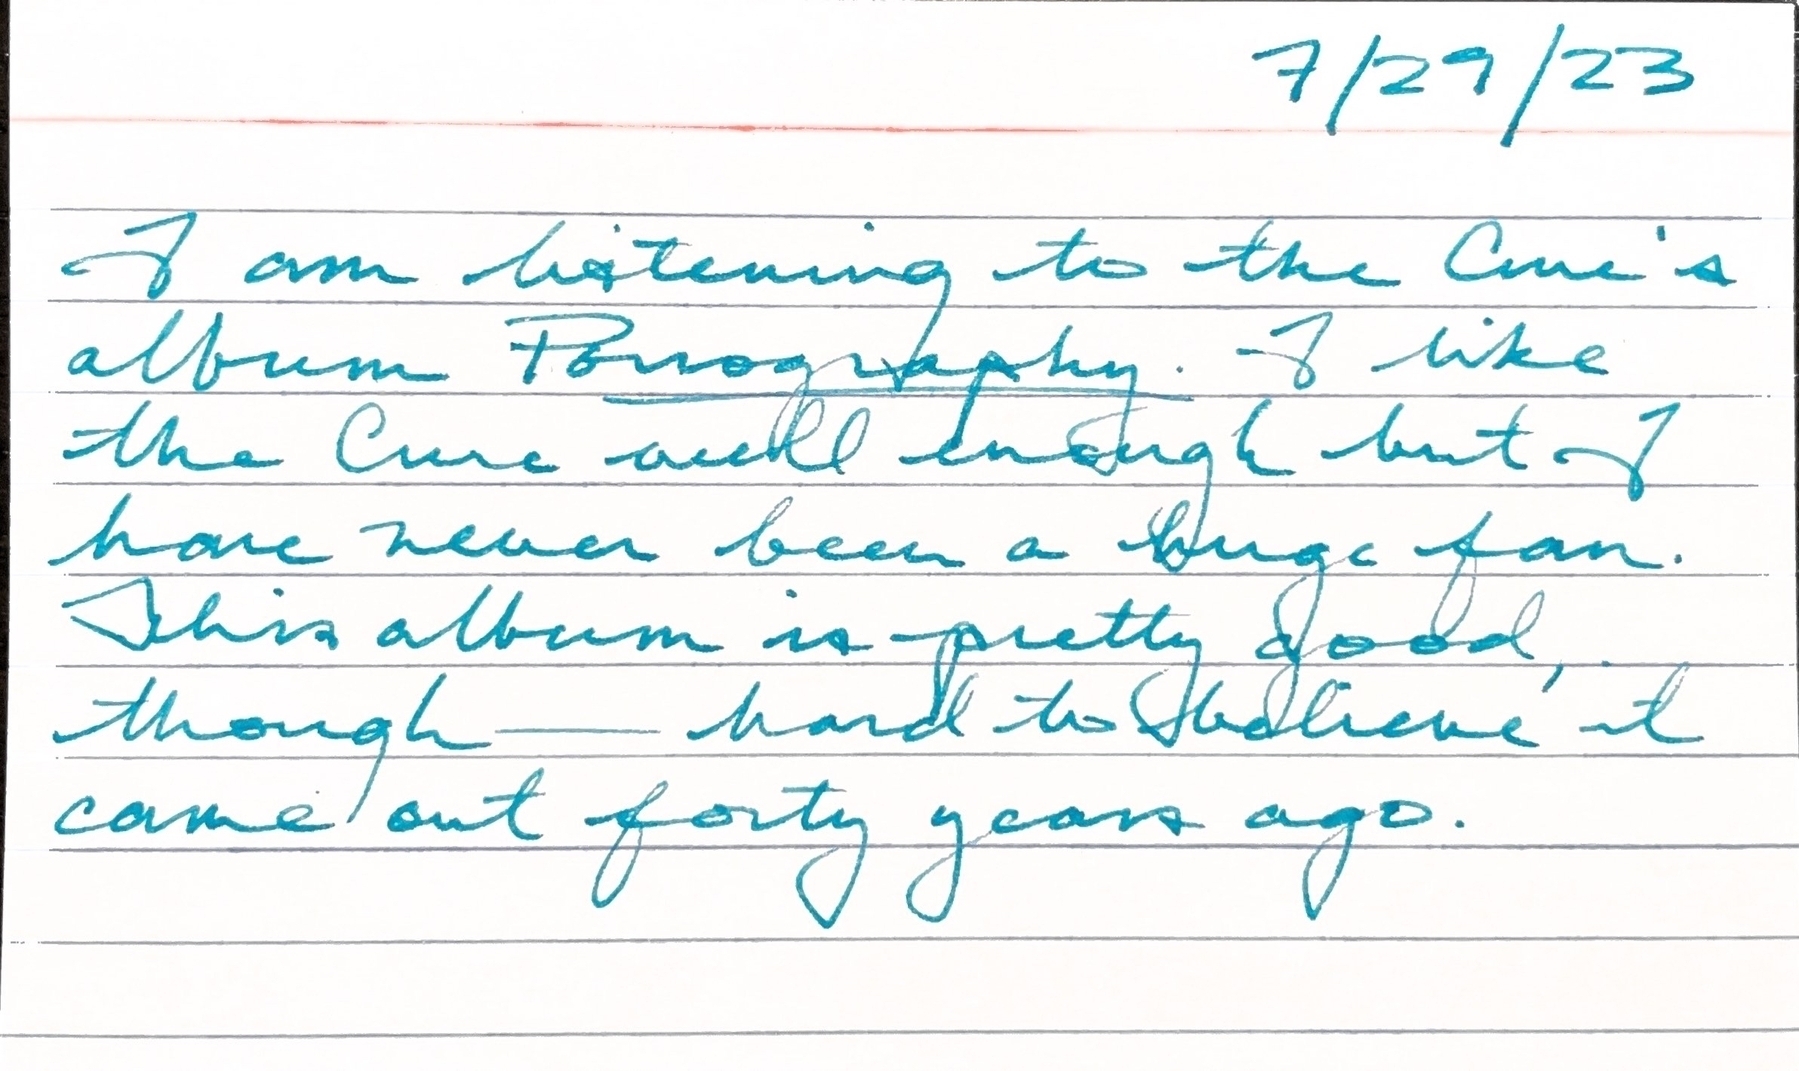 Handwritten index card about listening to The Cure